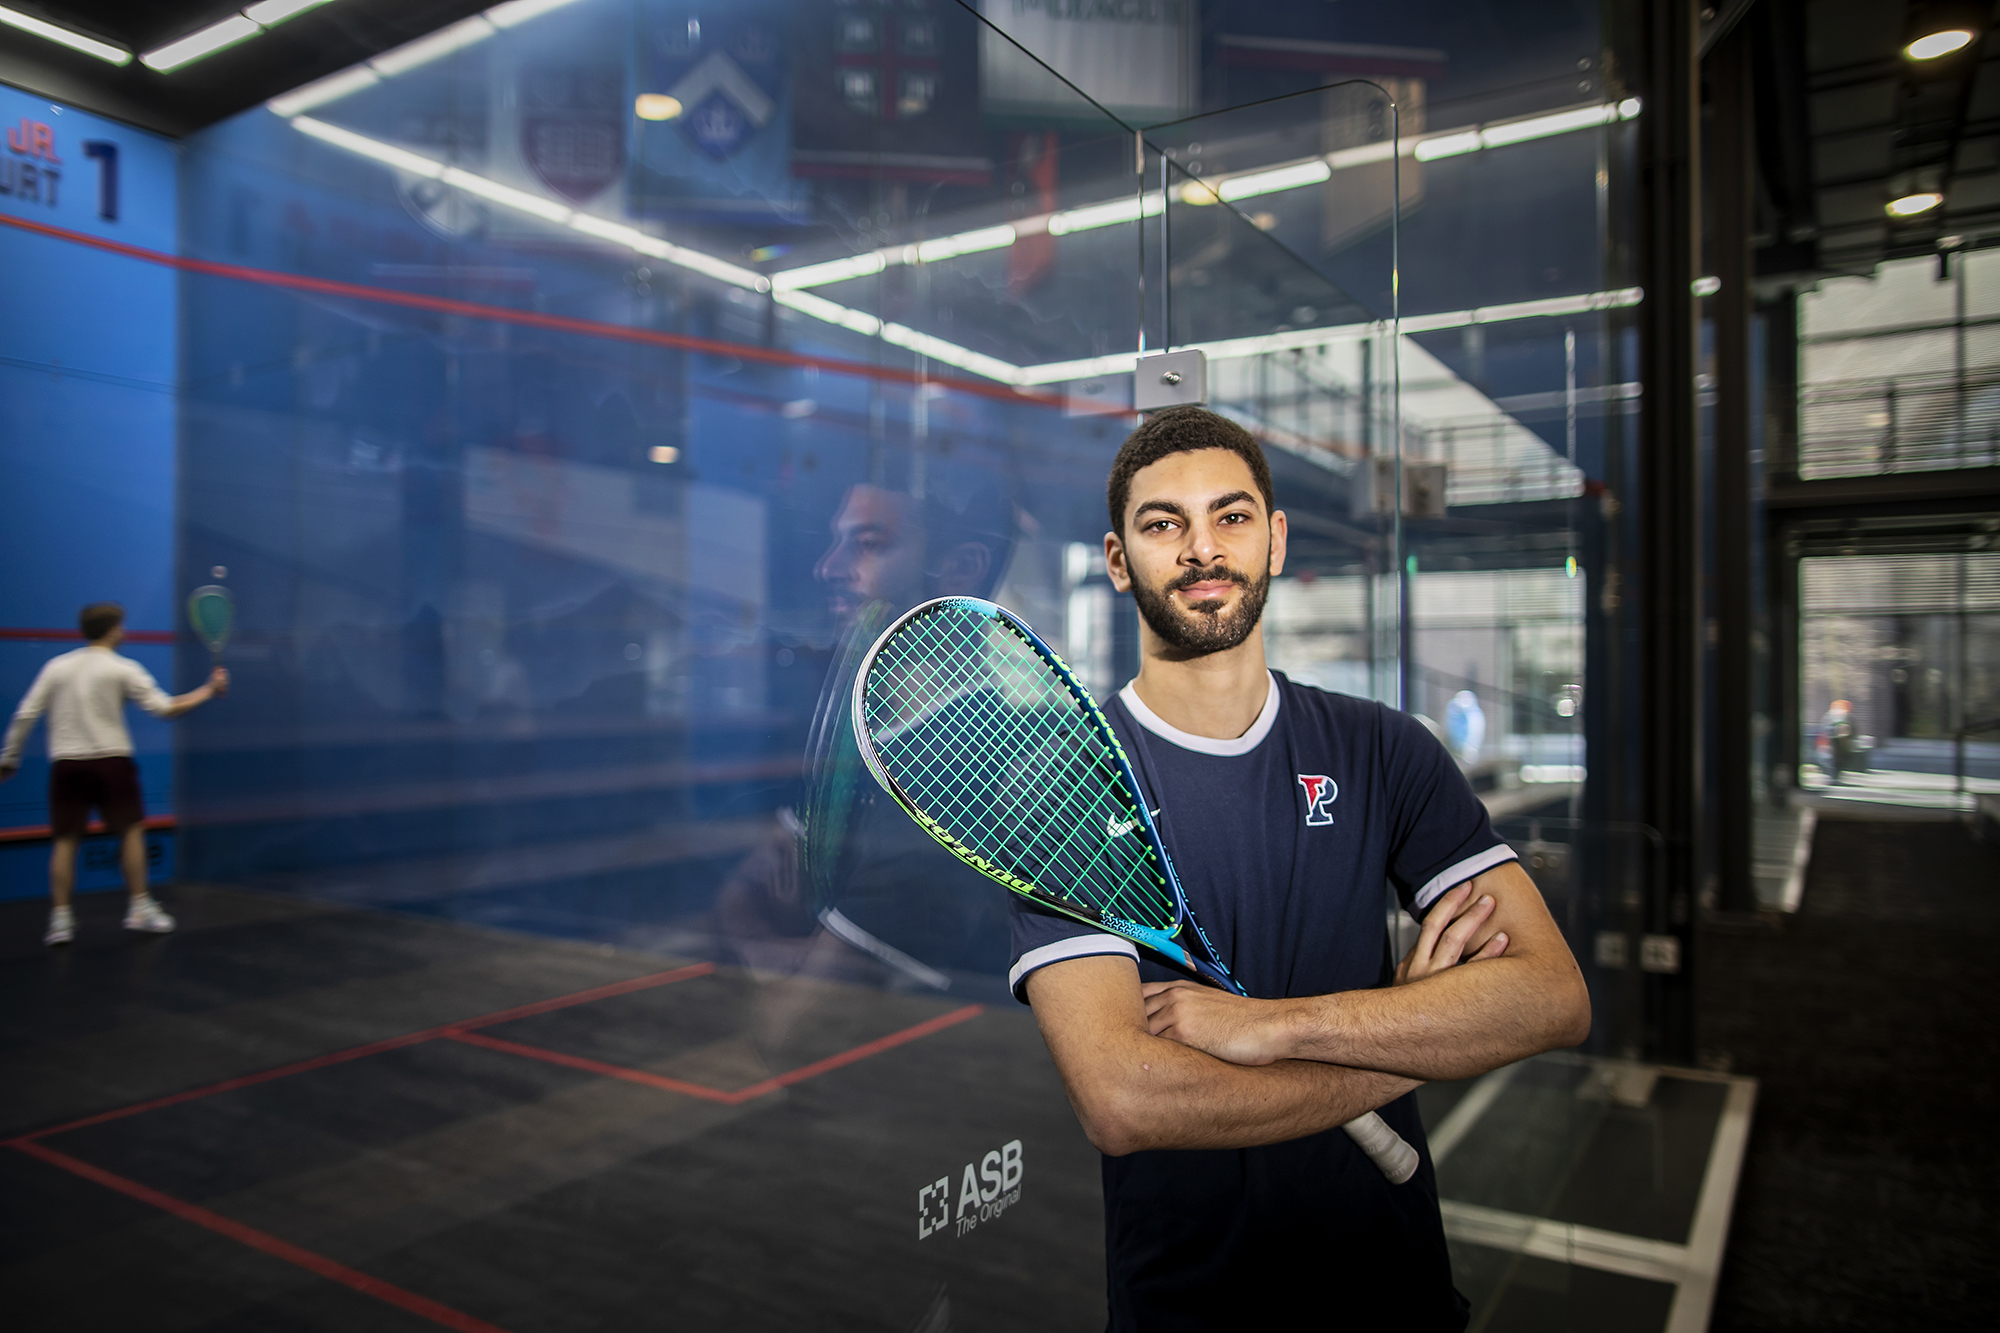 Aly Abou Eleinen stands outside a court with his arms folded at the Penn Squash Center.